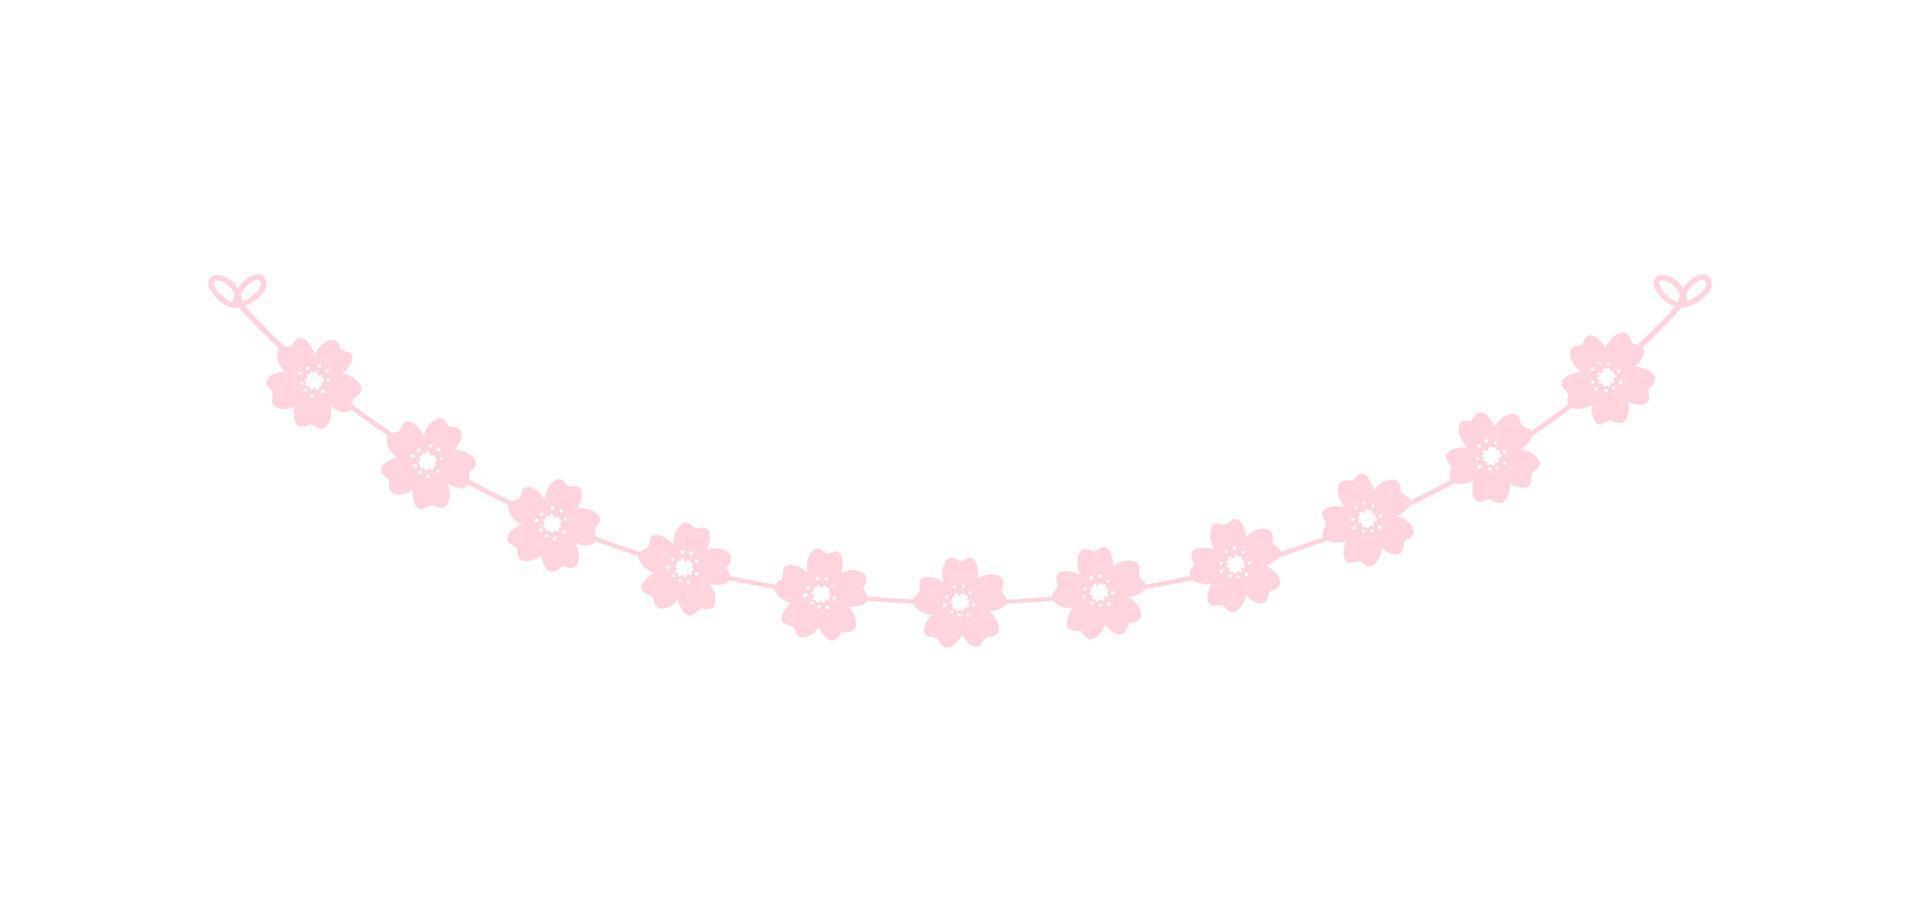 Cherry Blossom Garland, Cute Floral Bunting Spring Design Elements vector